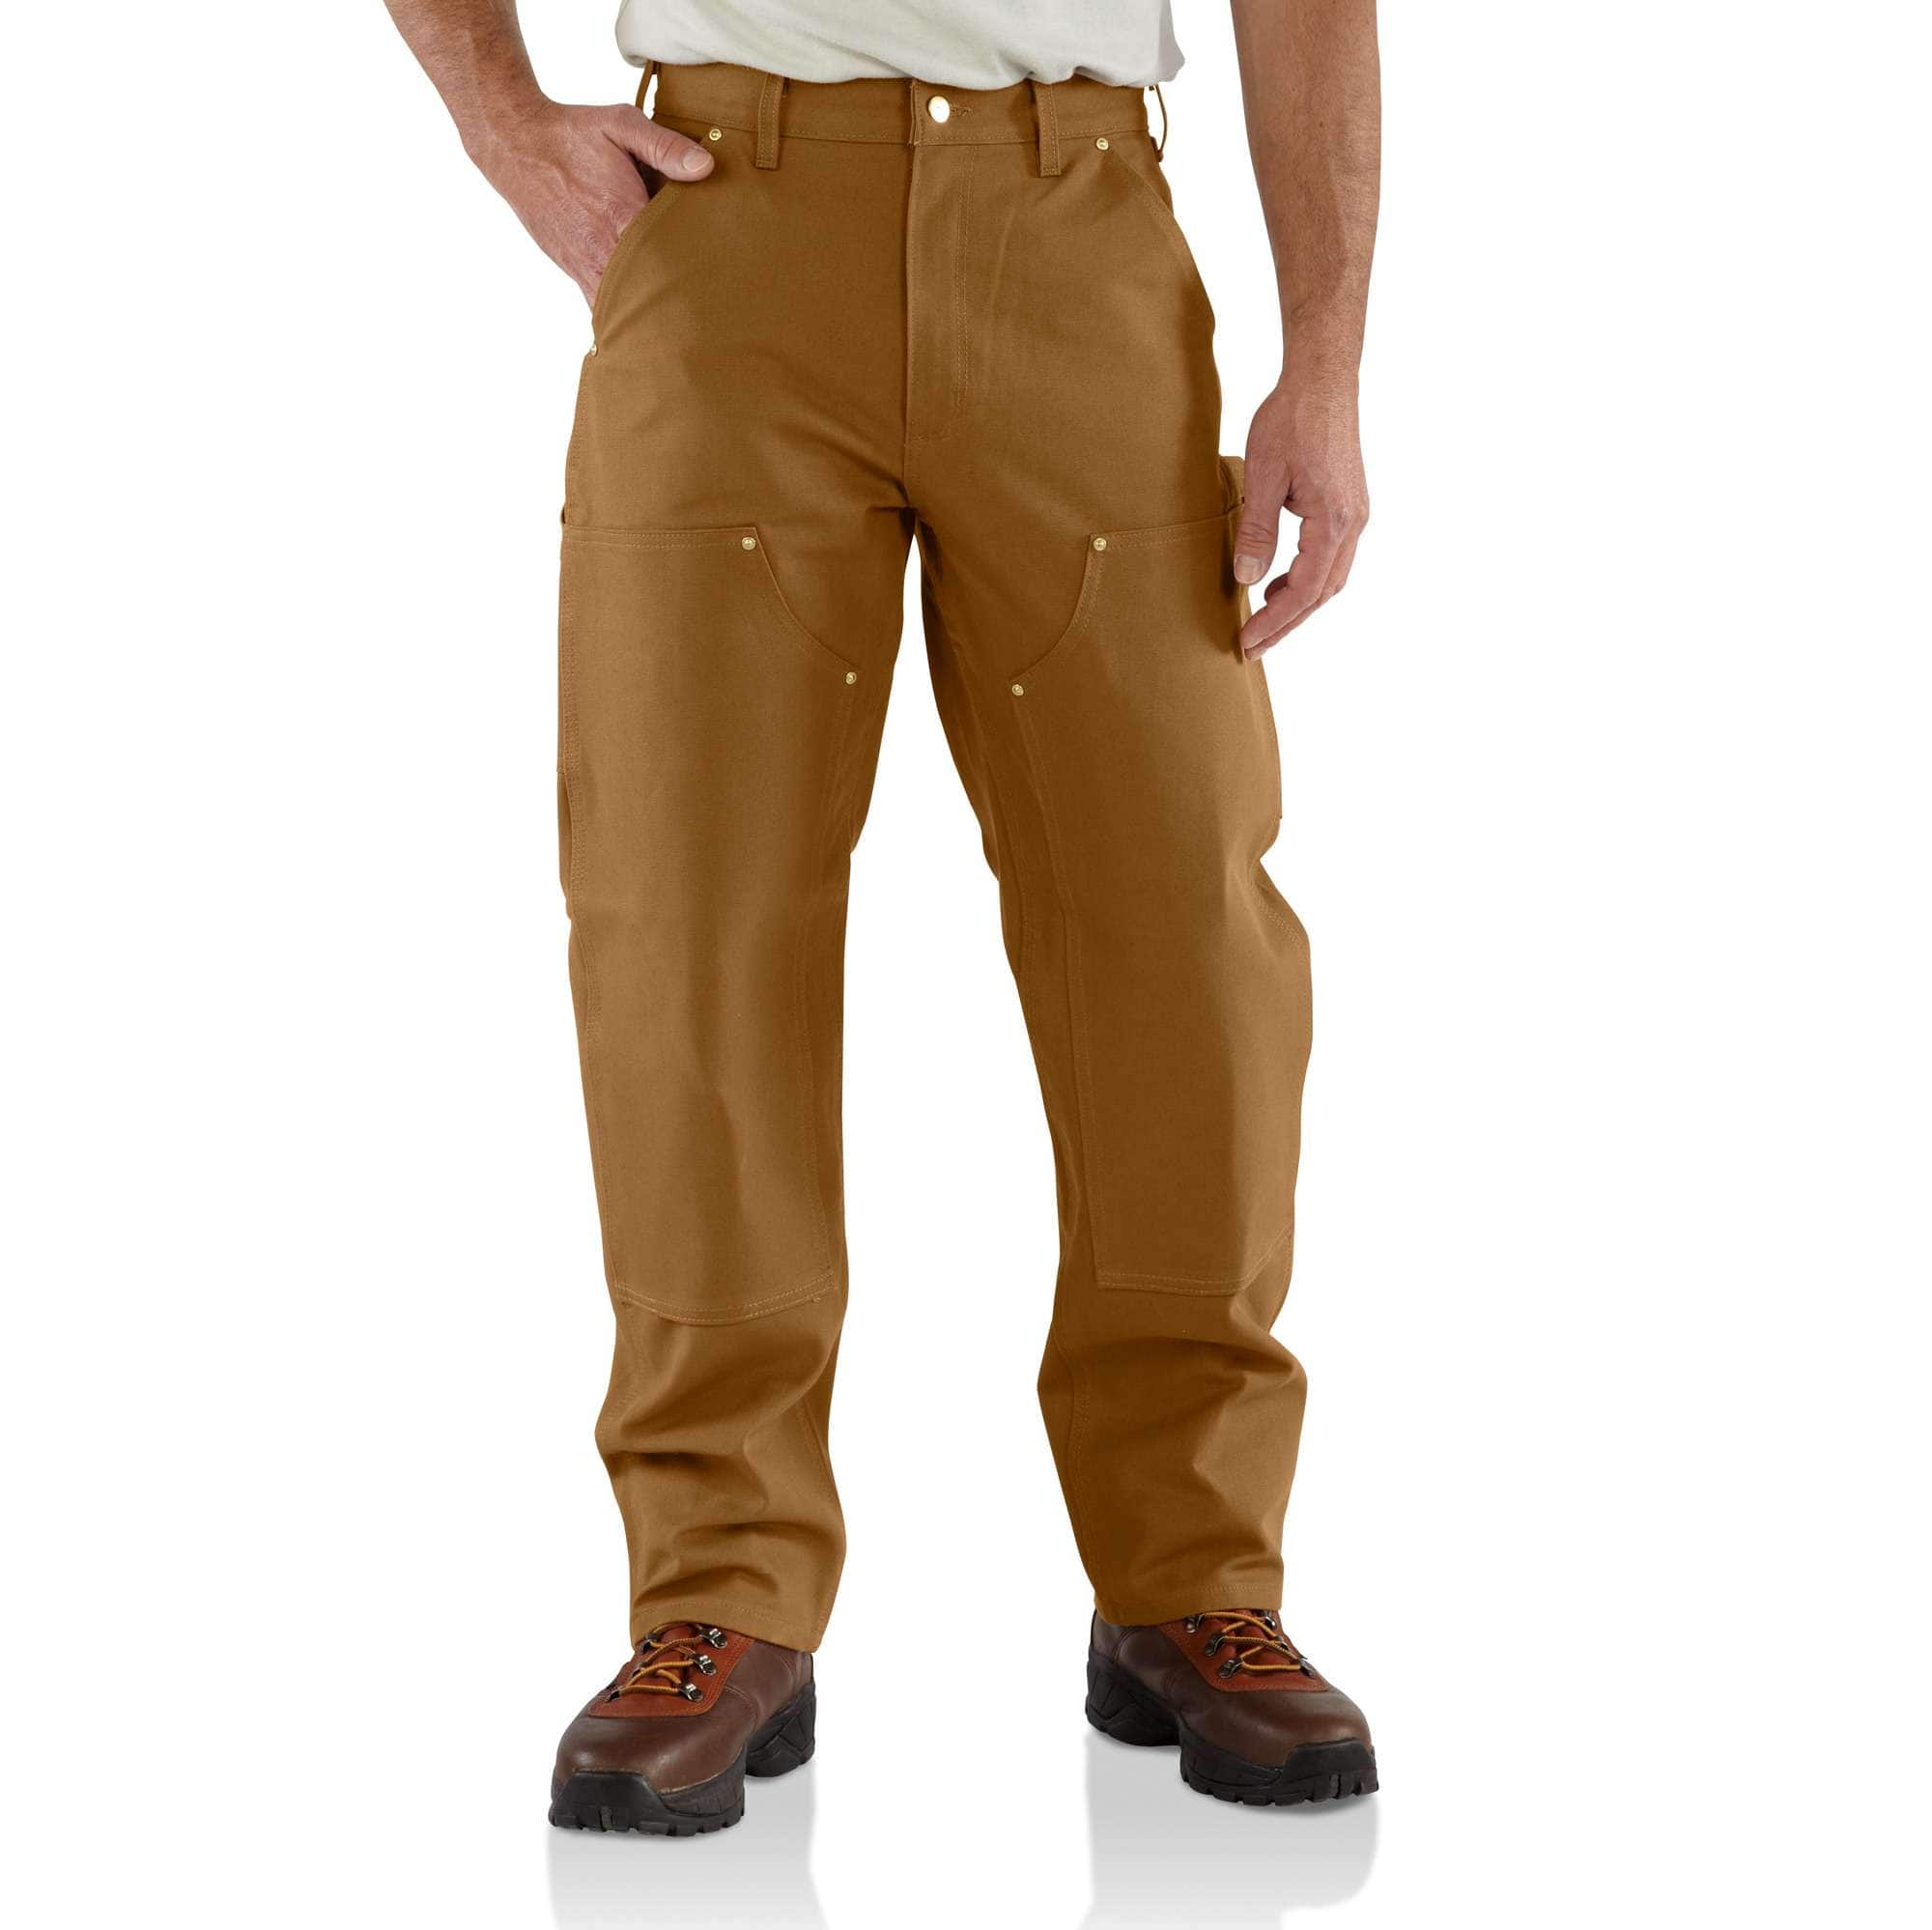 Men's Utility Double-Knee Pant - Loose Fit - Firm Duck